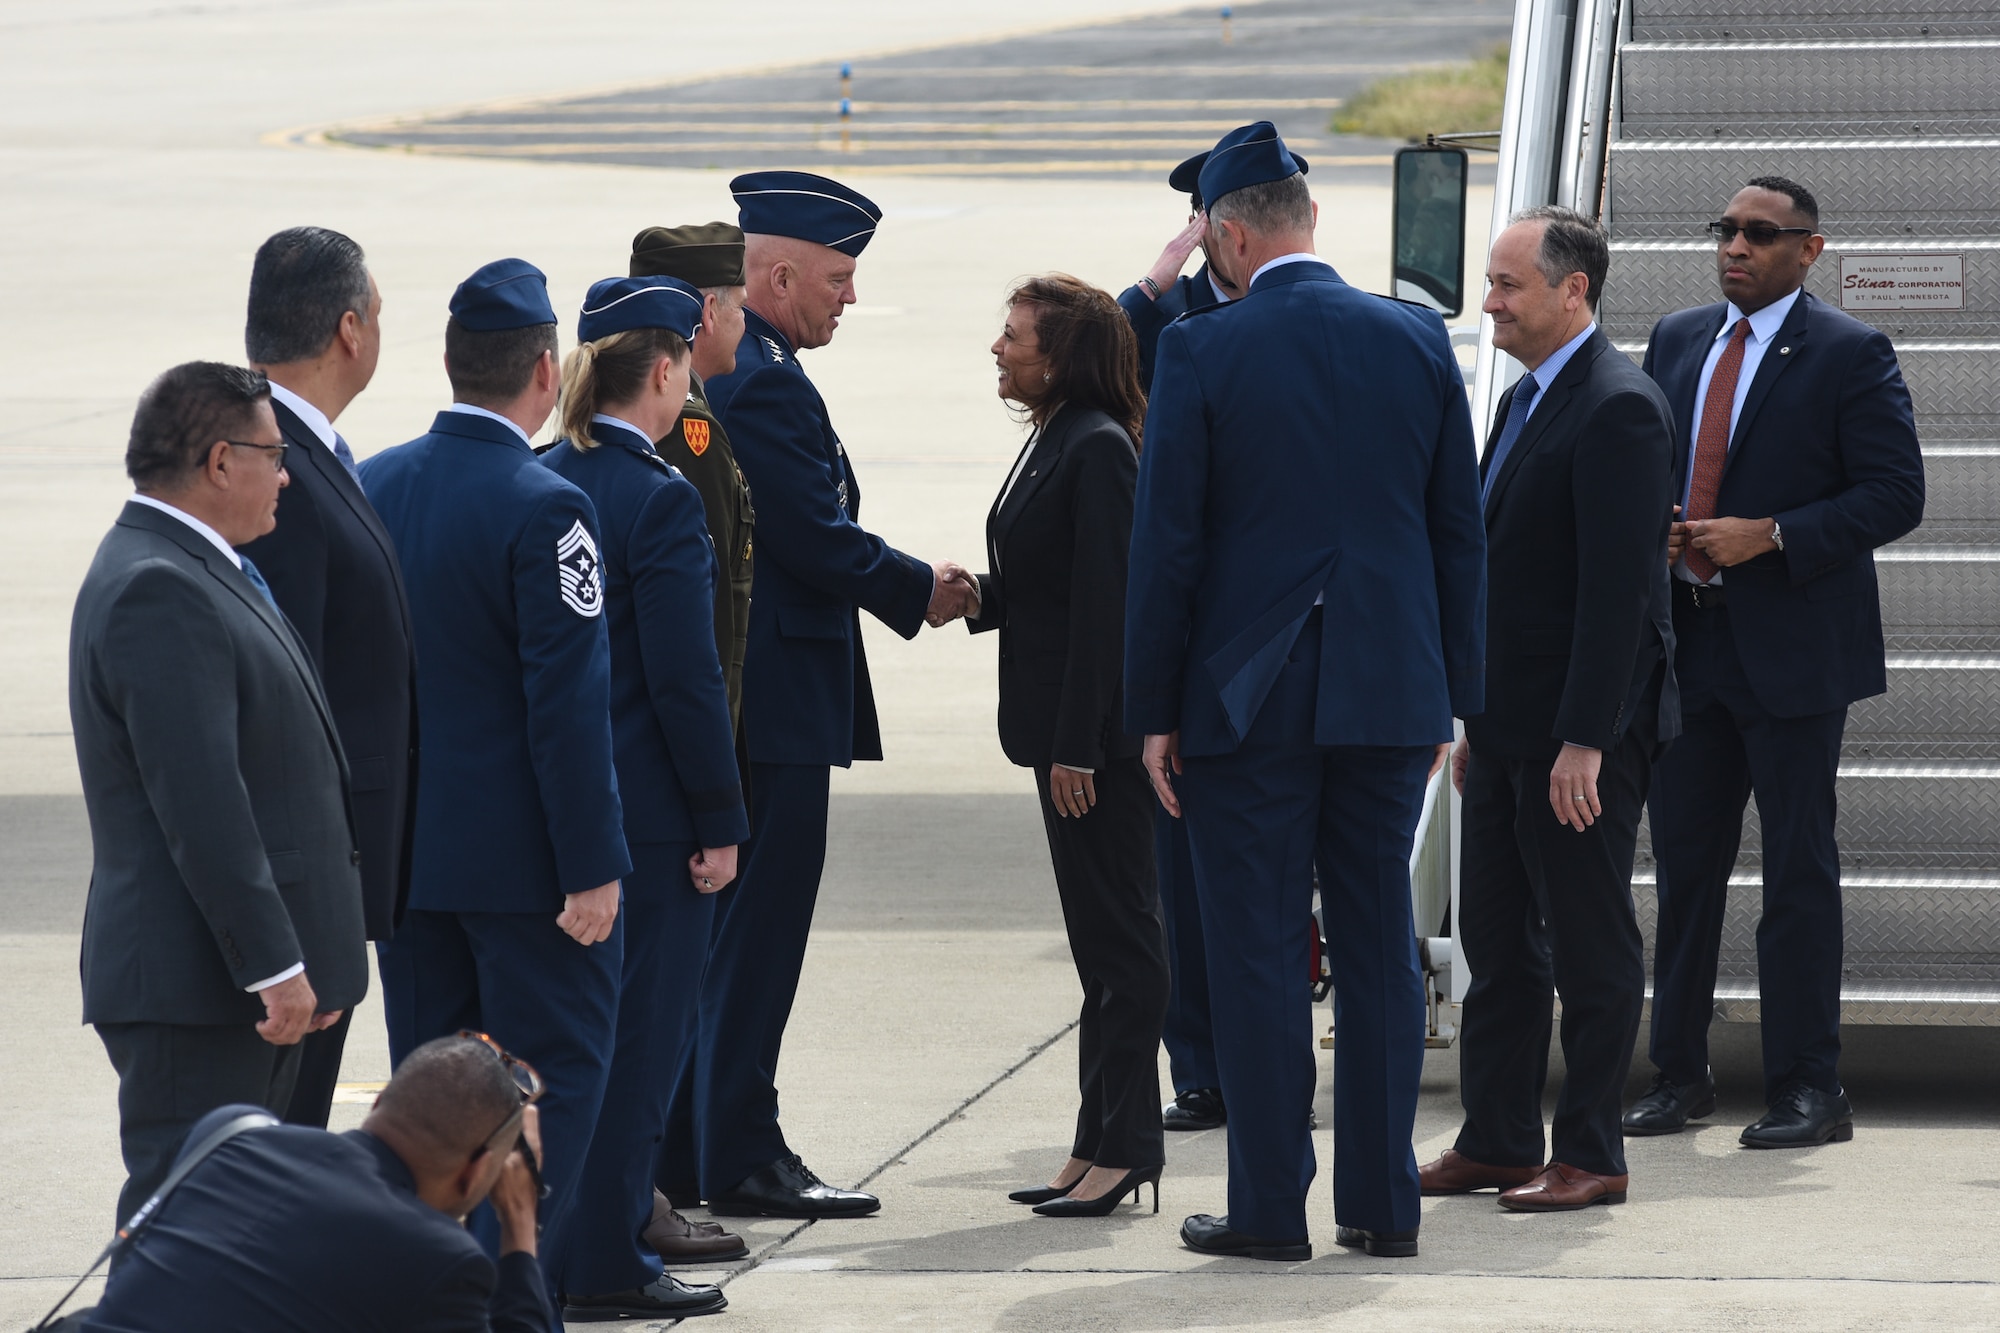 U.S. Vice President Kamala Harris is greeted by U.S. Space Force Chief of Space Operations Gen. John W. “Jay” Raymond, upon her arrival at Vandenberg Space Force Base